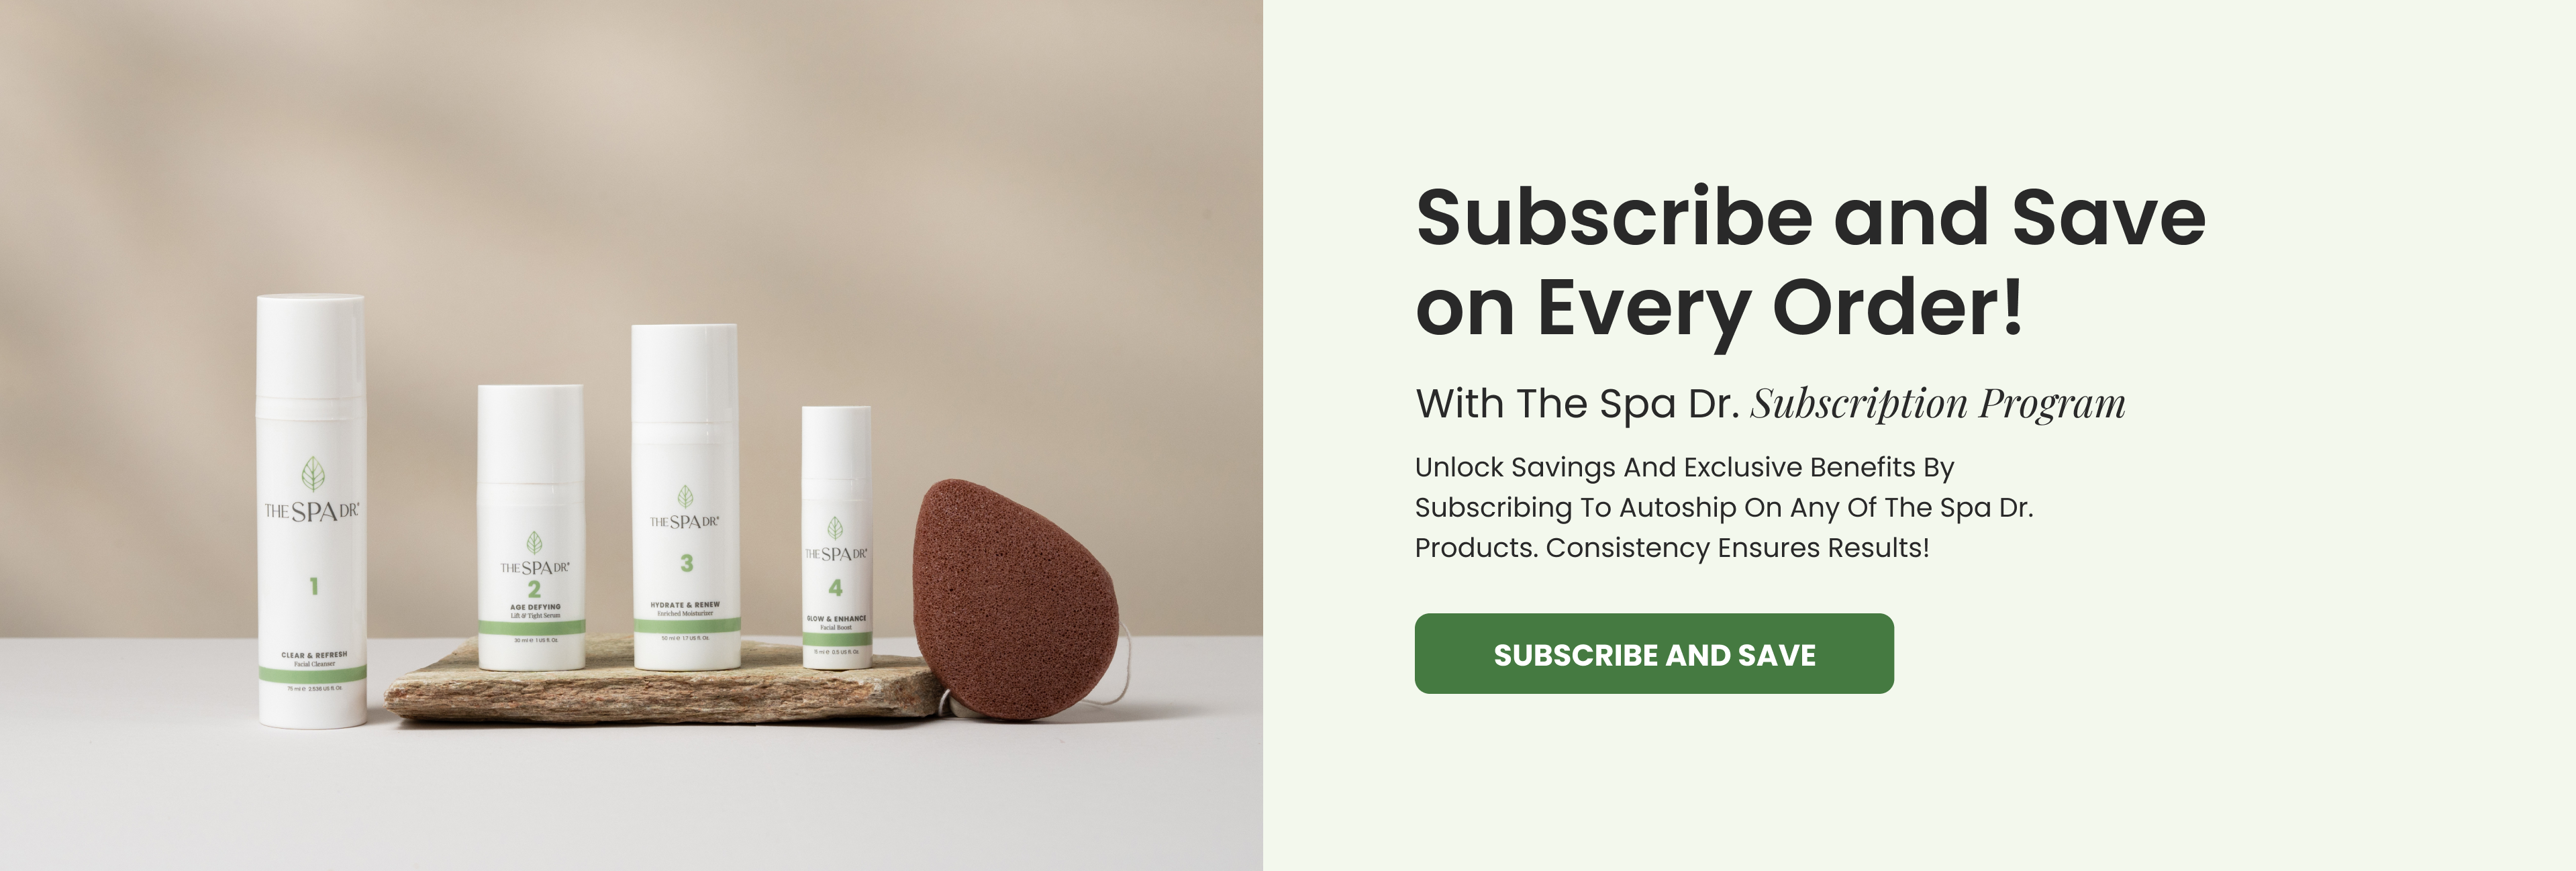 Subscribe and Save on Every Order